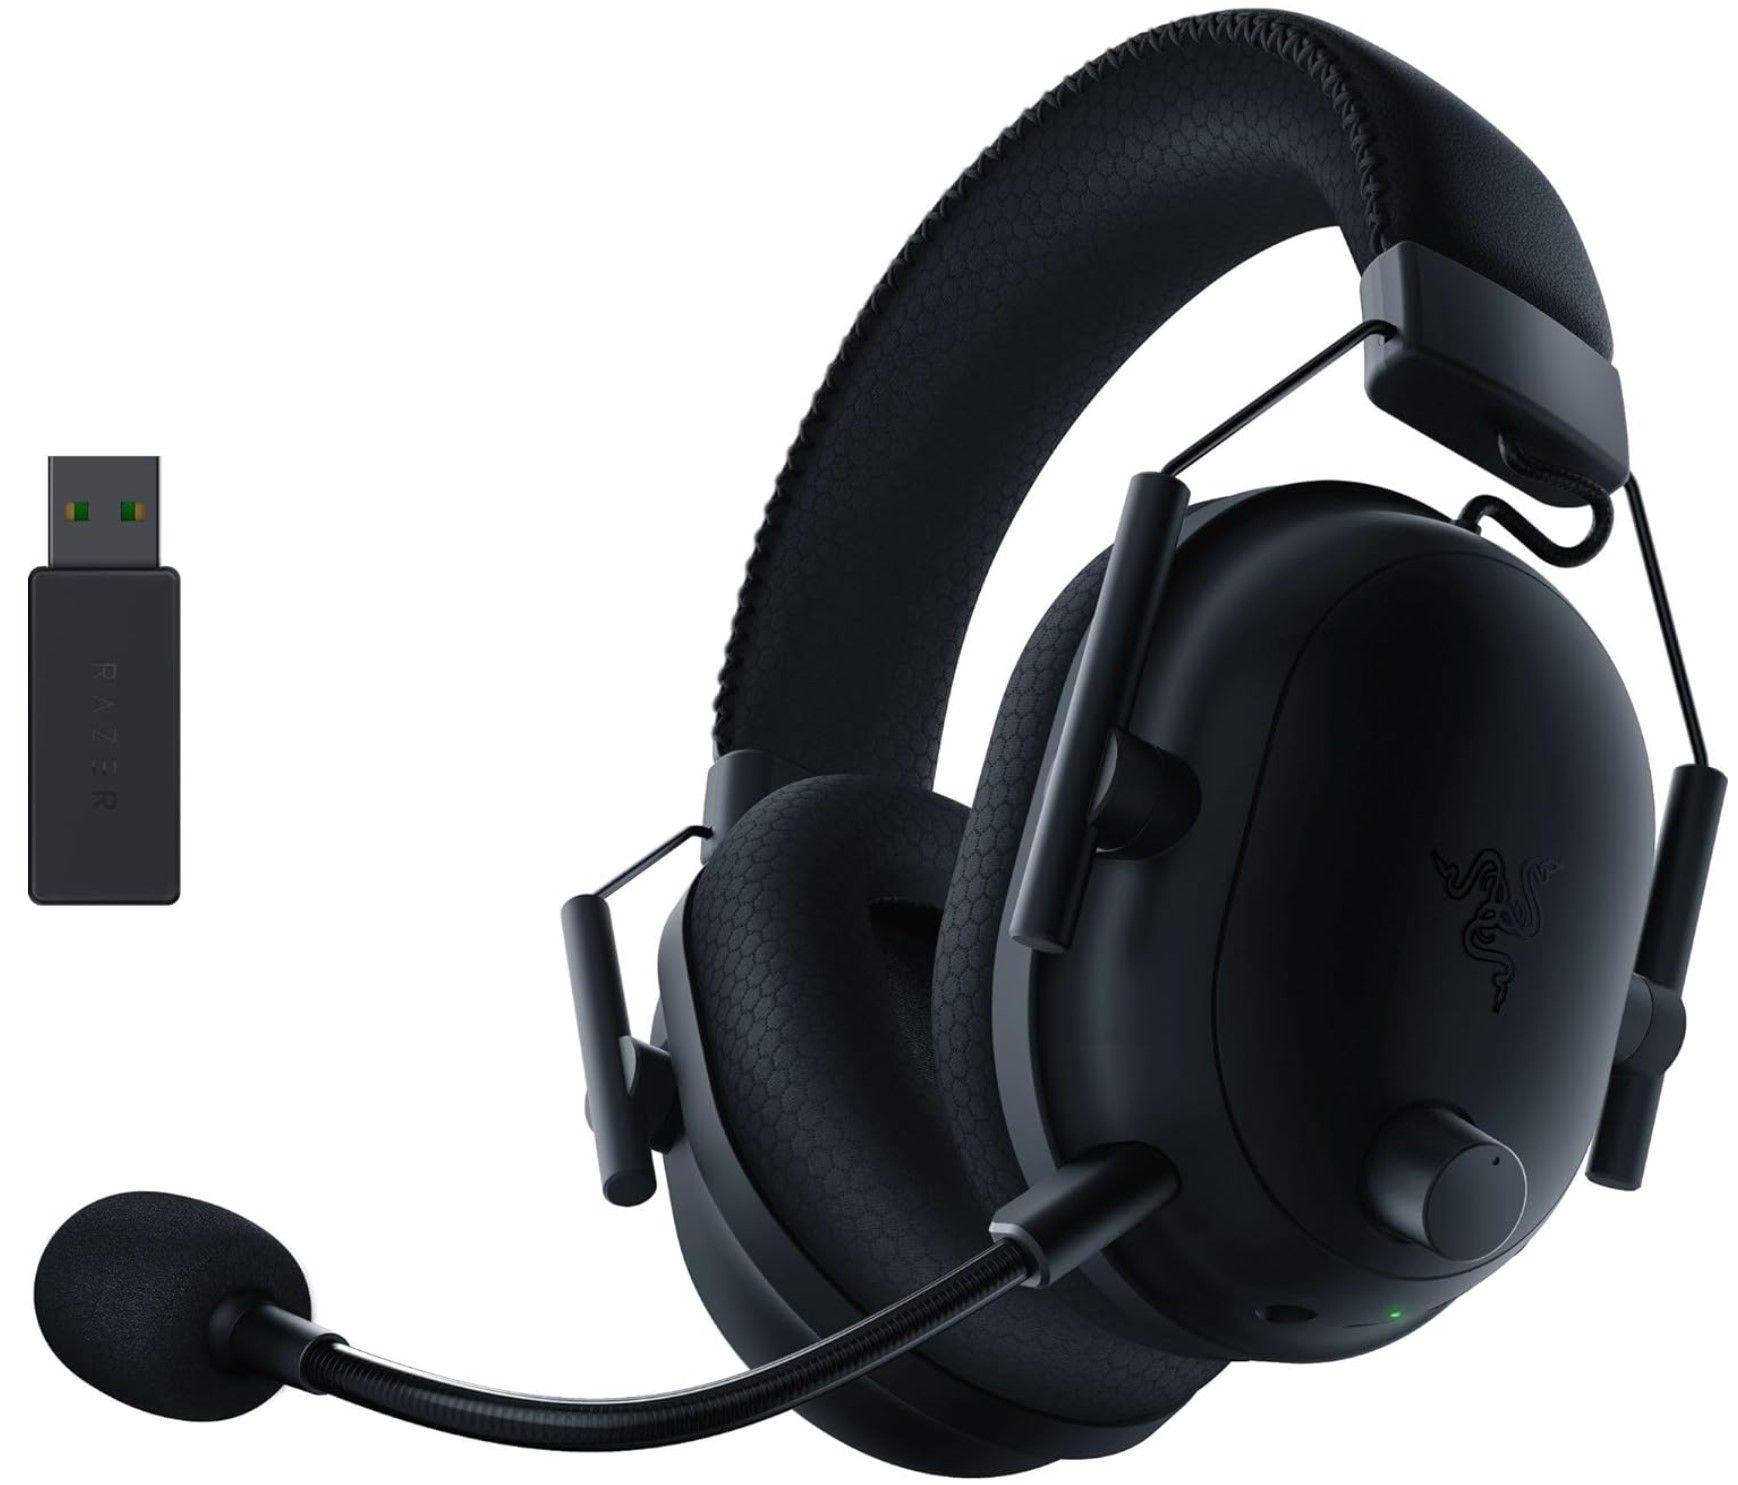 Best Noise Cancelling Headphones Deal 2023: $98 Sony, 34% Off Discount